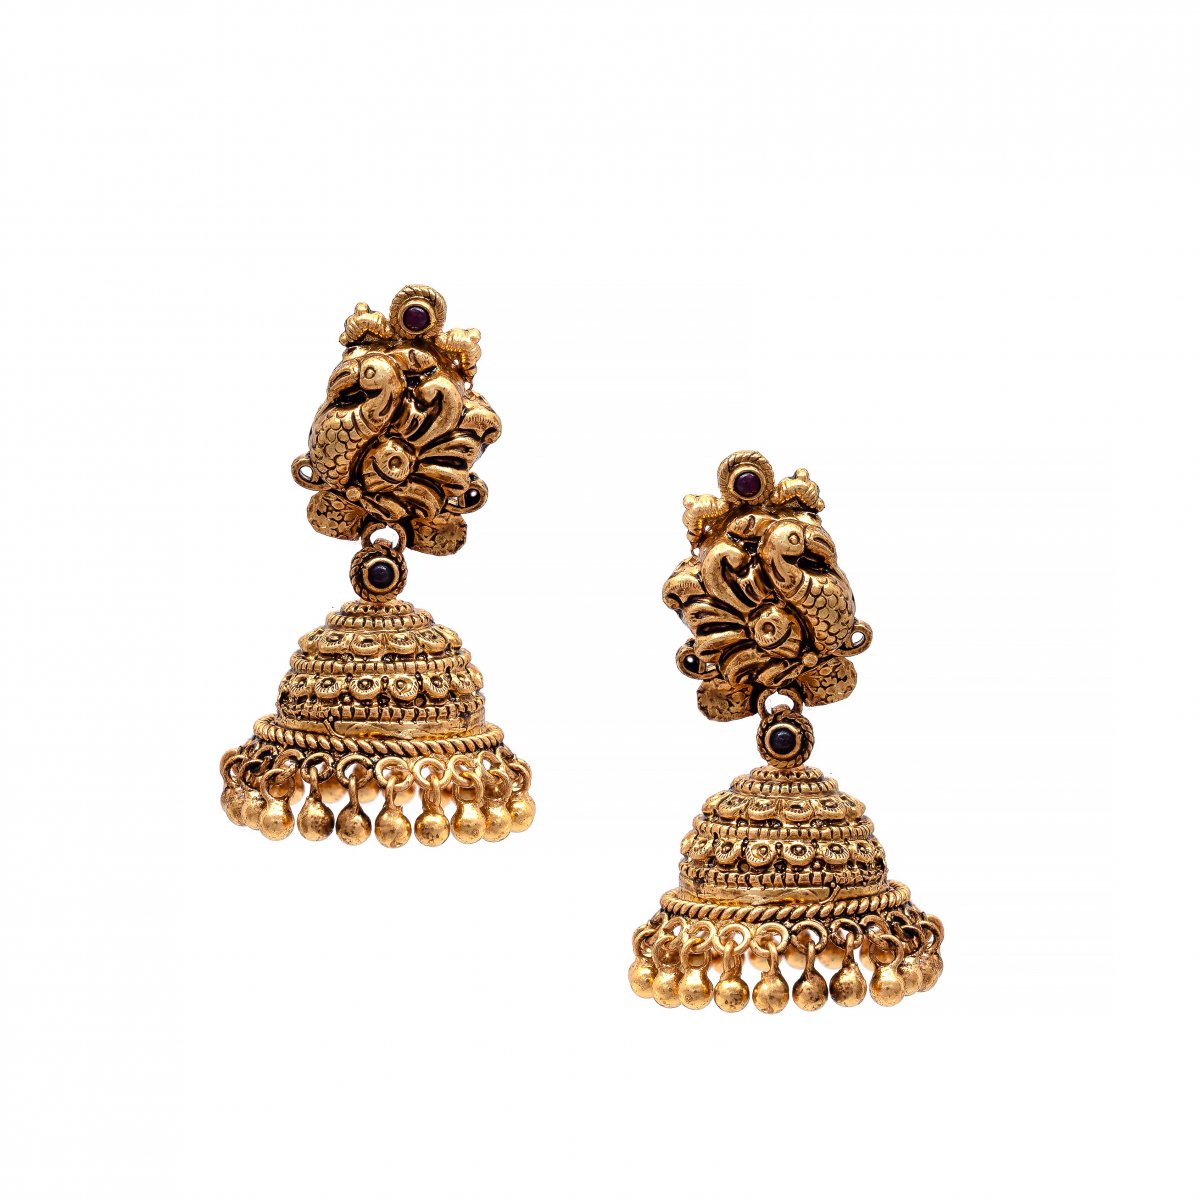 92.5 SILVER GOLD POLISHED PEACOCK NAGAS JHUMKI FOR GIRLS